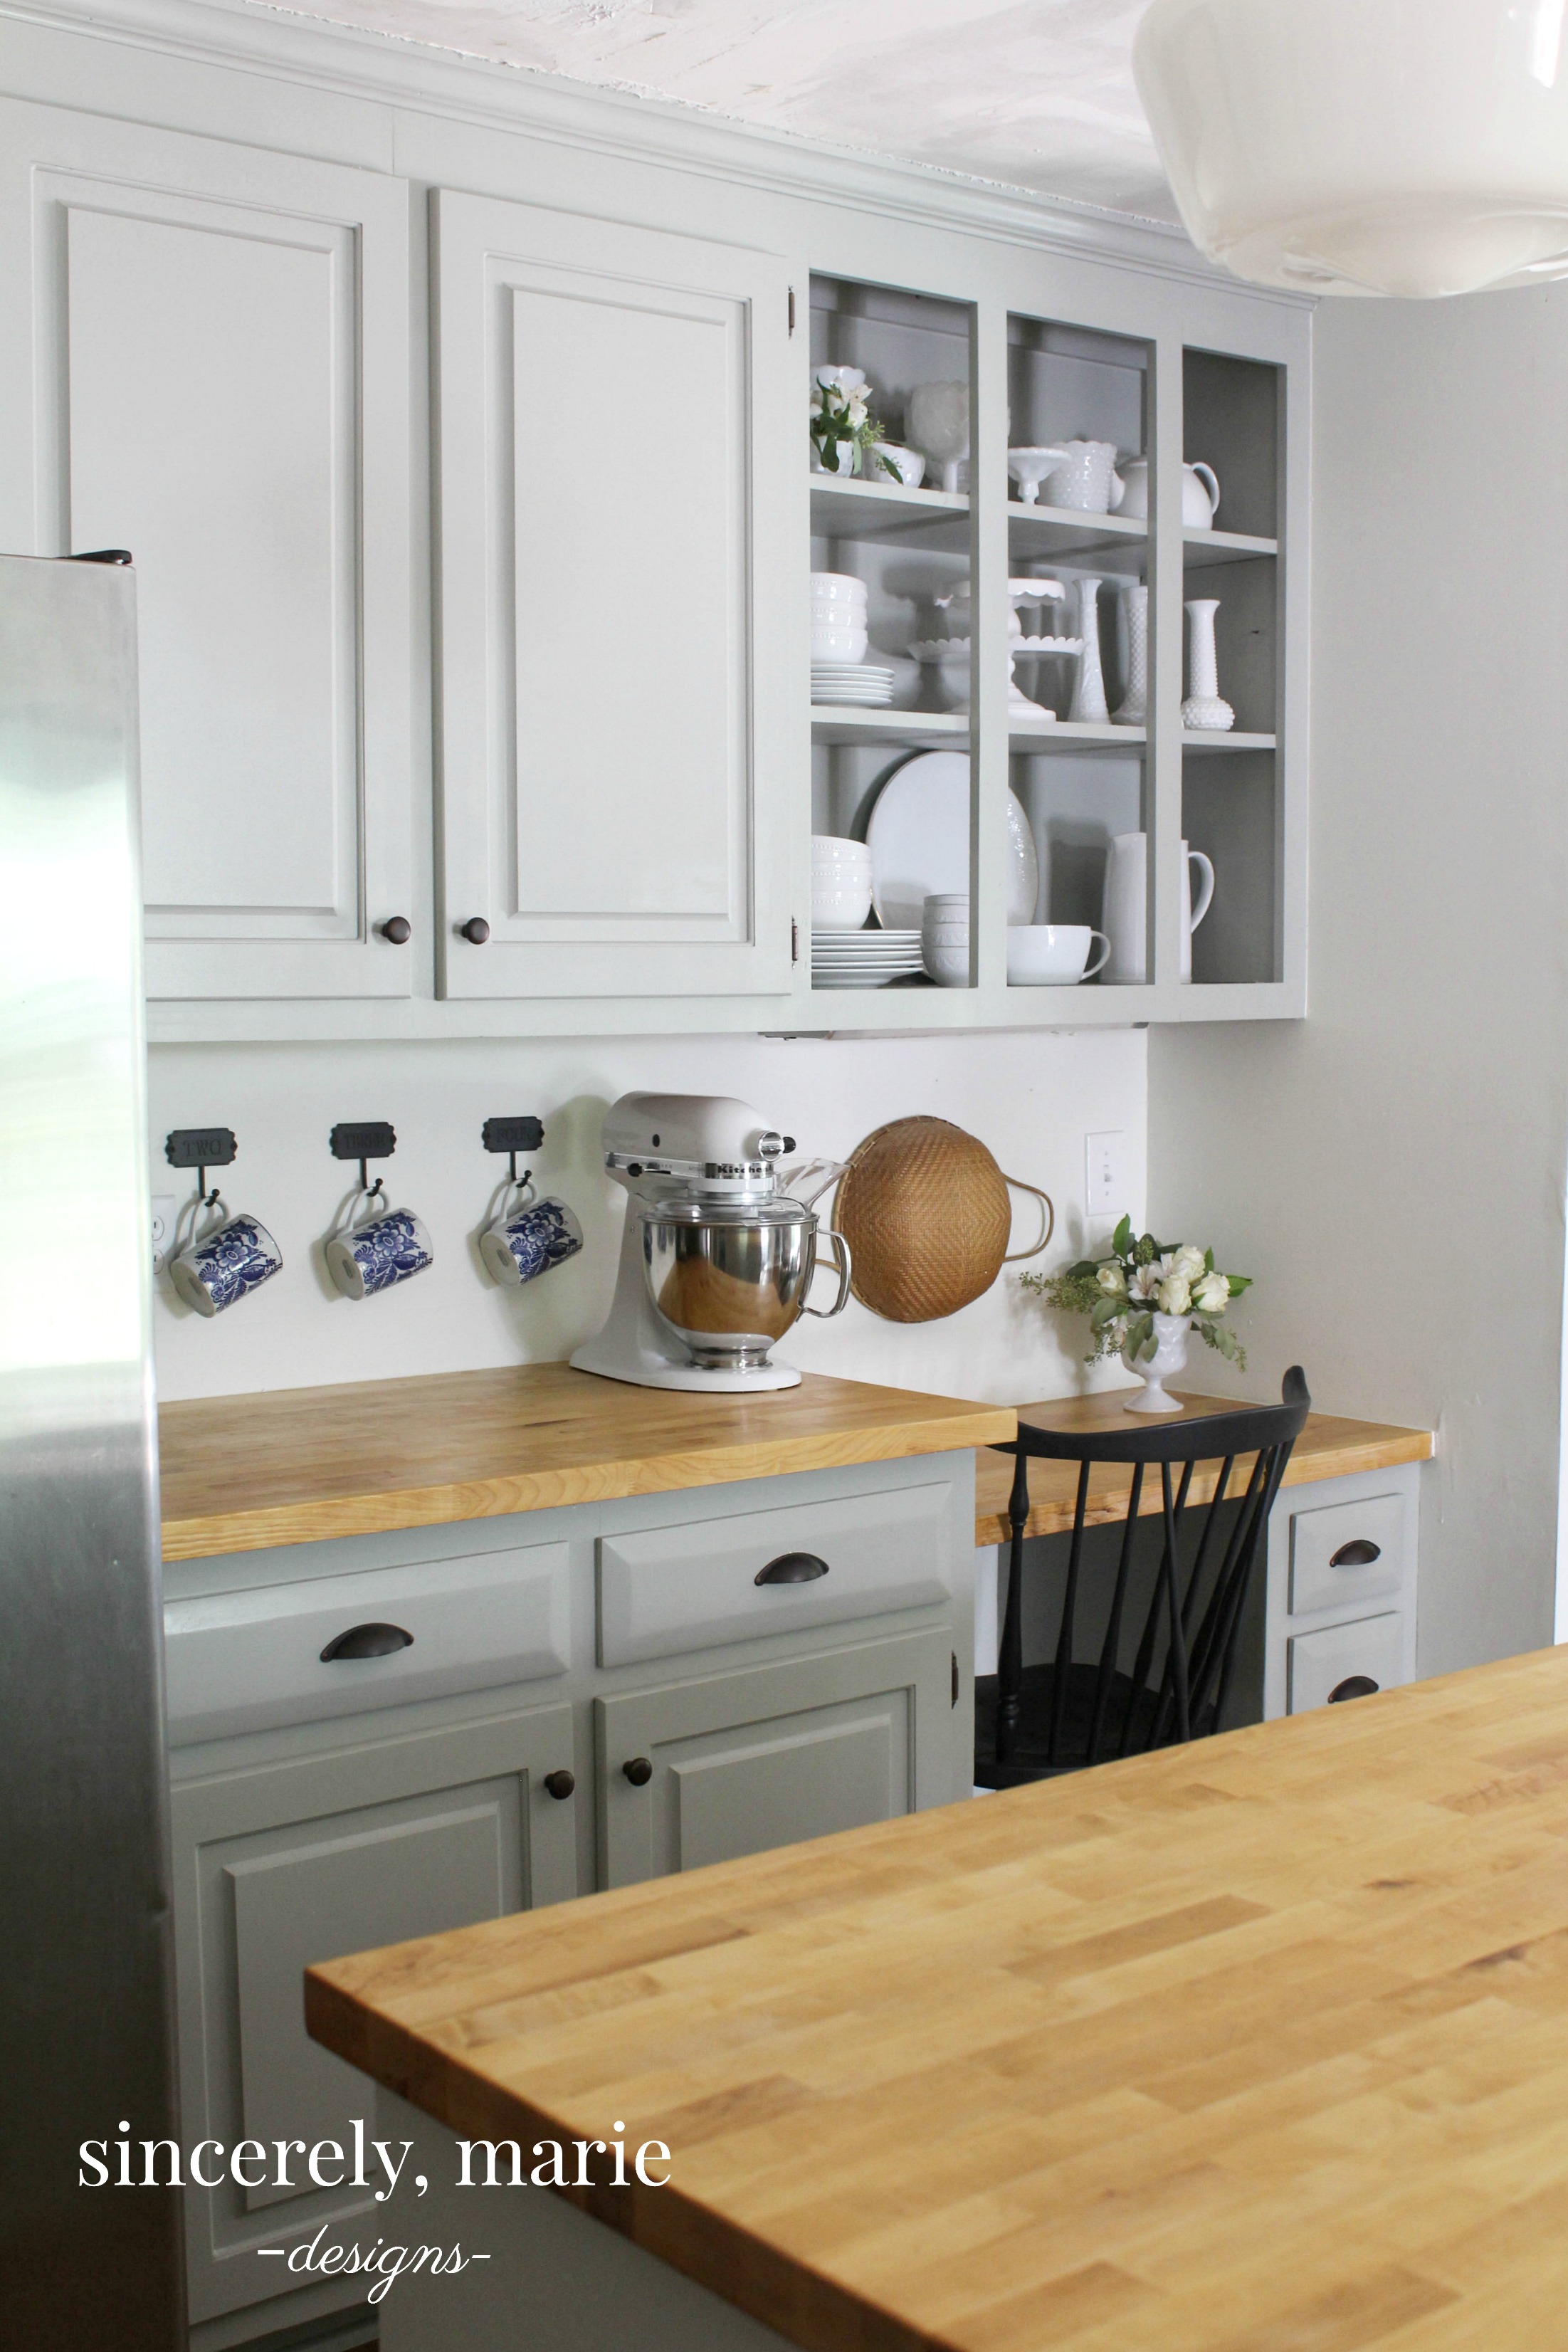 Kitchen Cabinets Vs Opening Shelving, Open Shelving And Cabinets